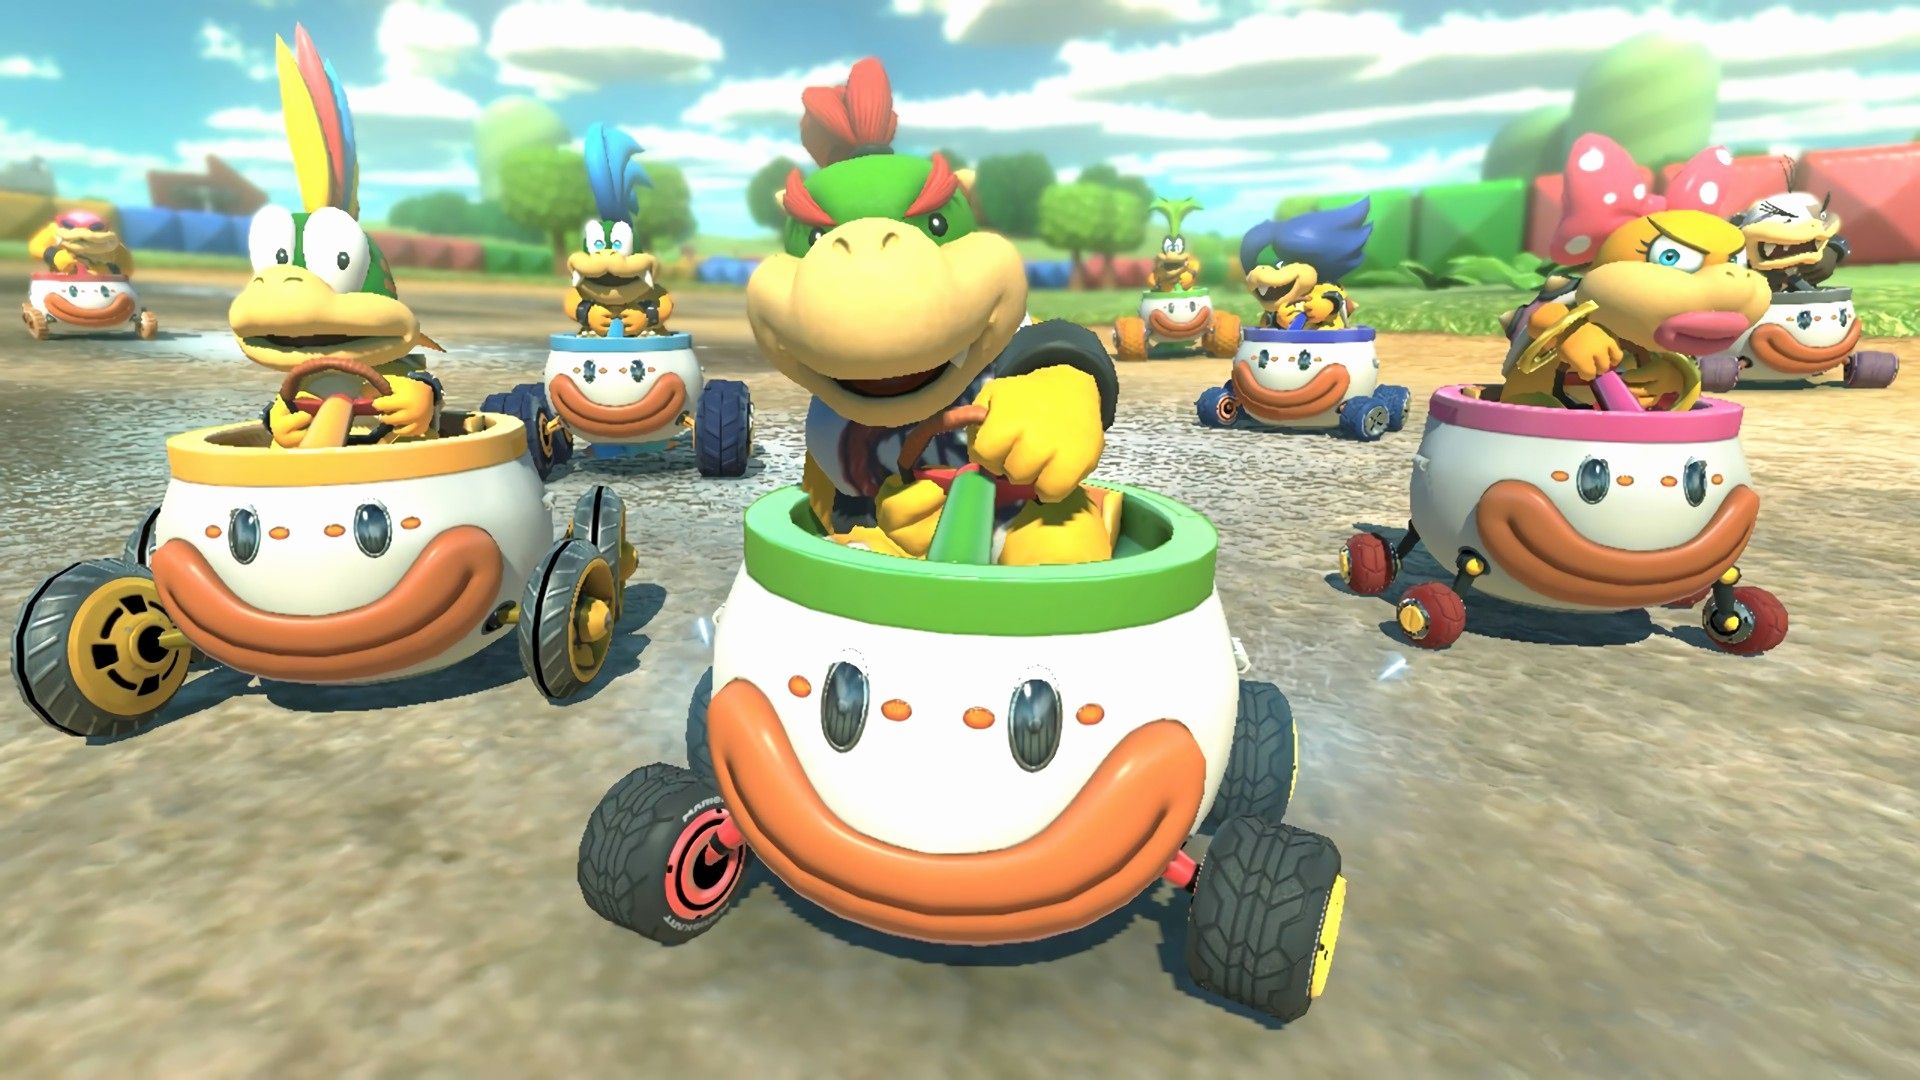 Bowser Jr Wallpaper Luxury Bowser Wallpaper 79 Image This Year of The Hudson